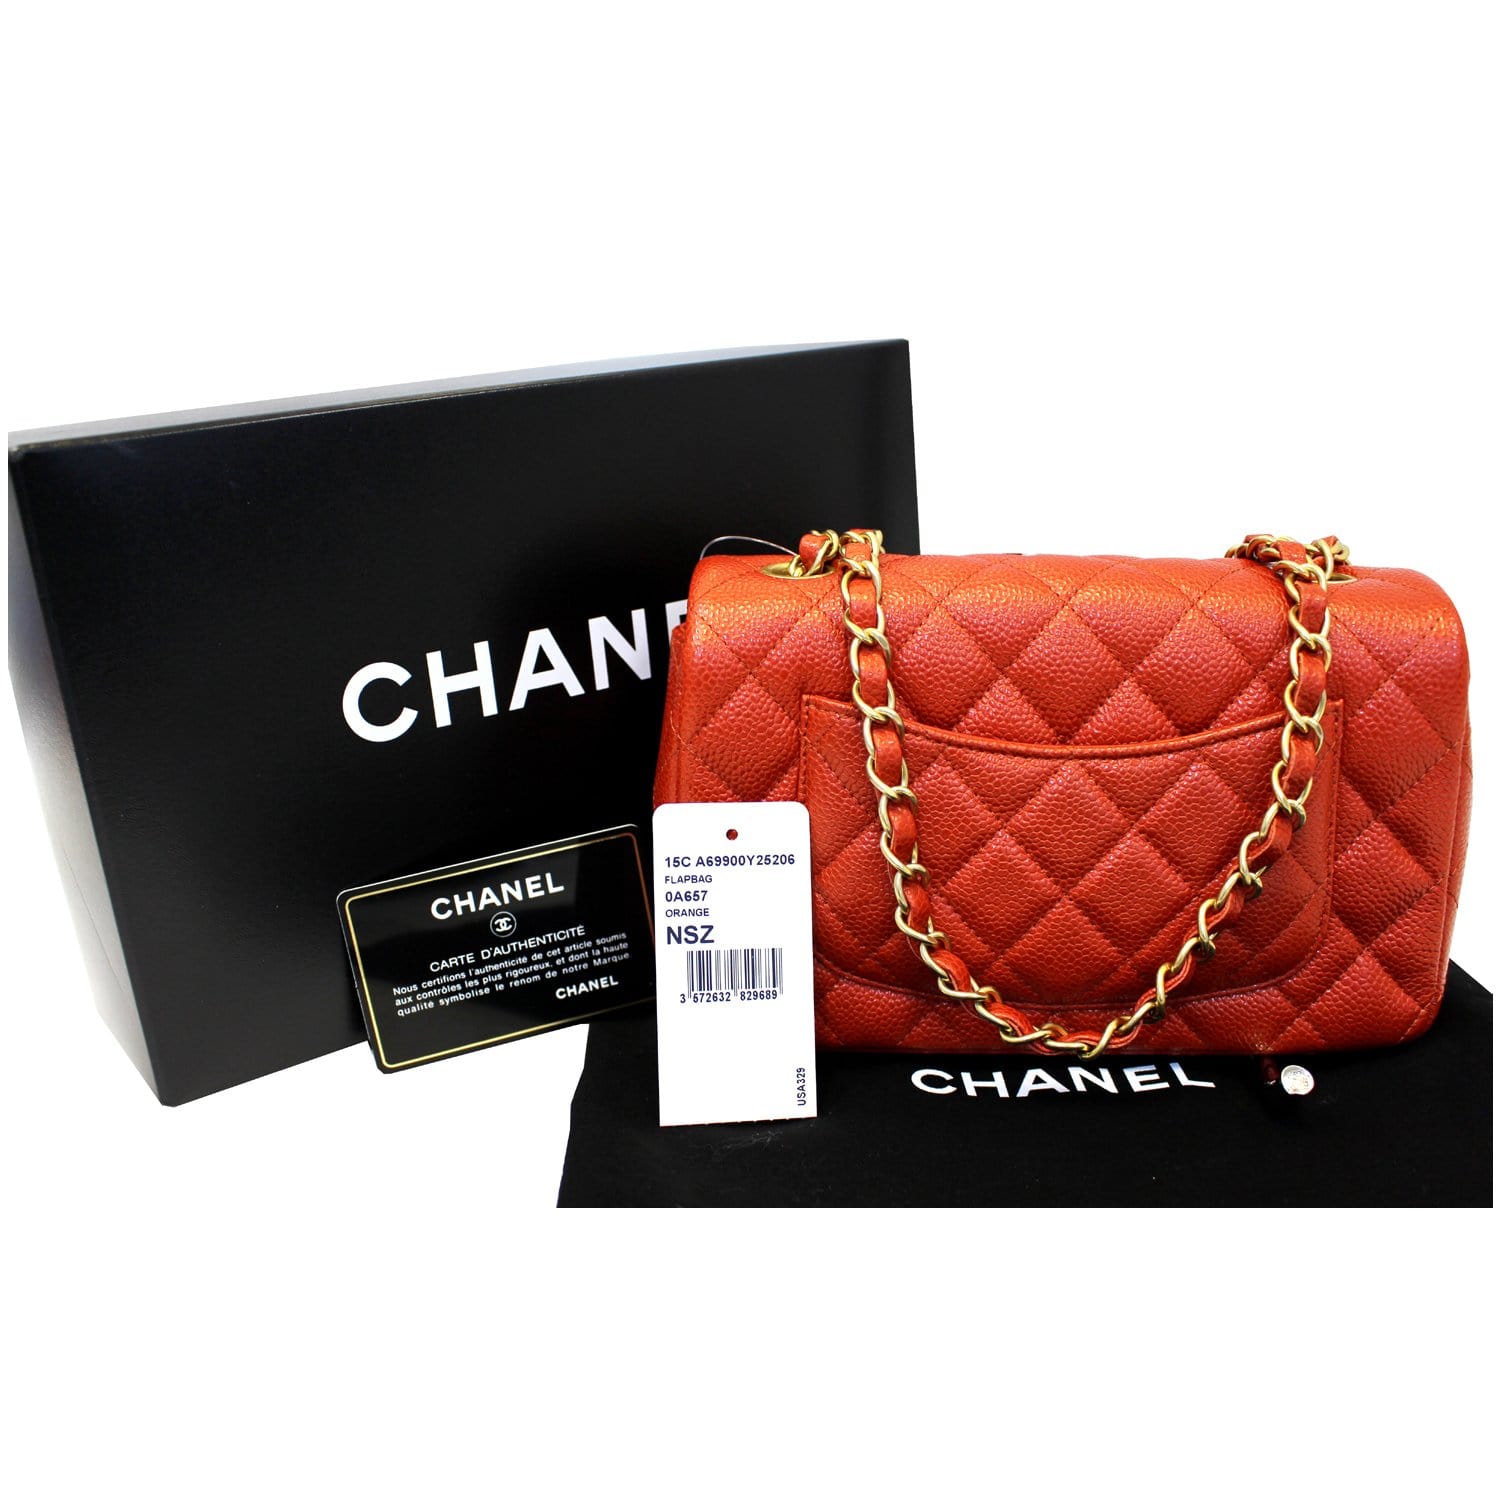 Chanel Classic Flap Small  19C Red Caviar Gold Hardware – loveholic